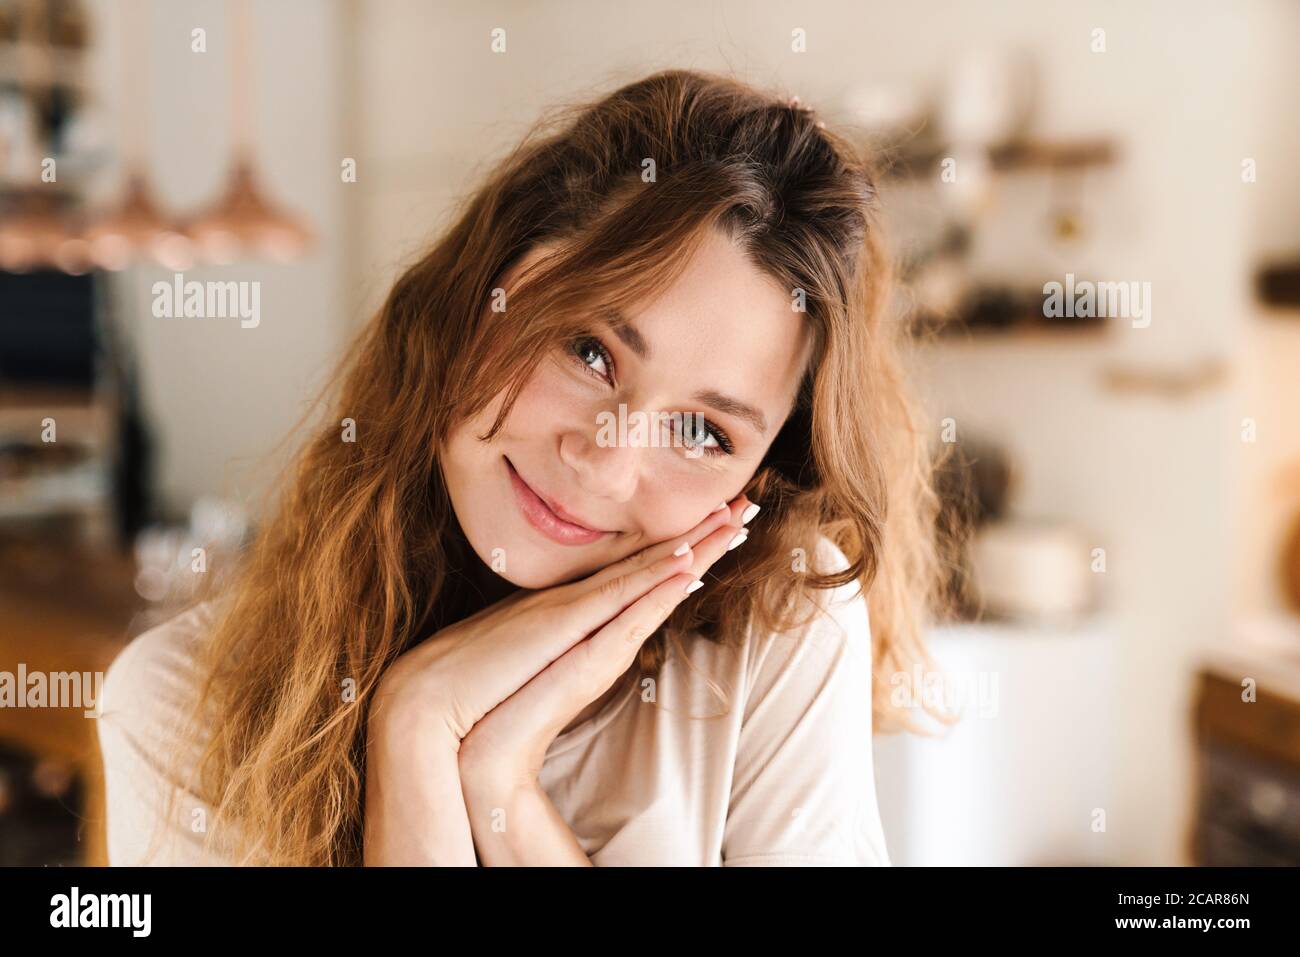 Cheerful lovely girl standing in the kitchen, looking at camera Stock Photo